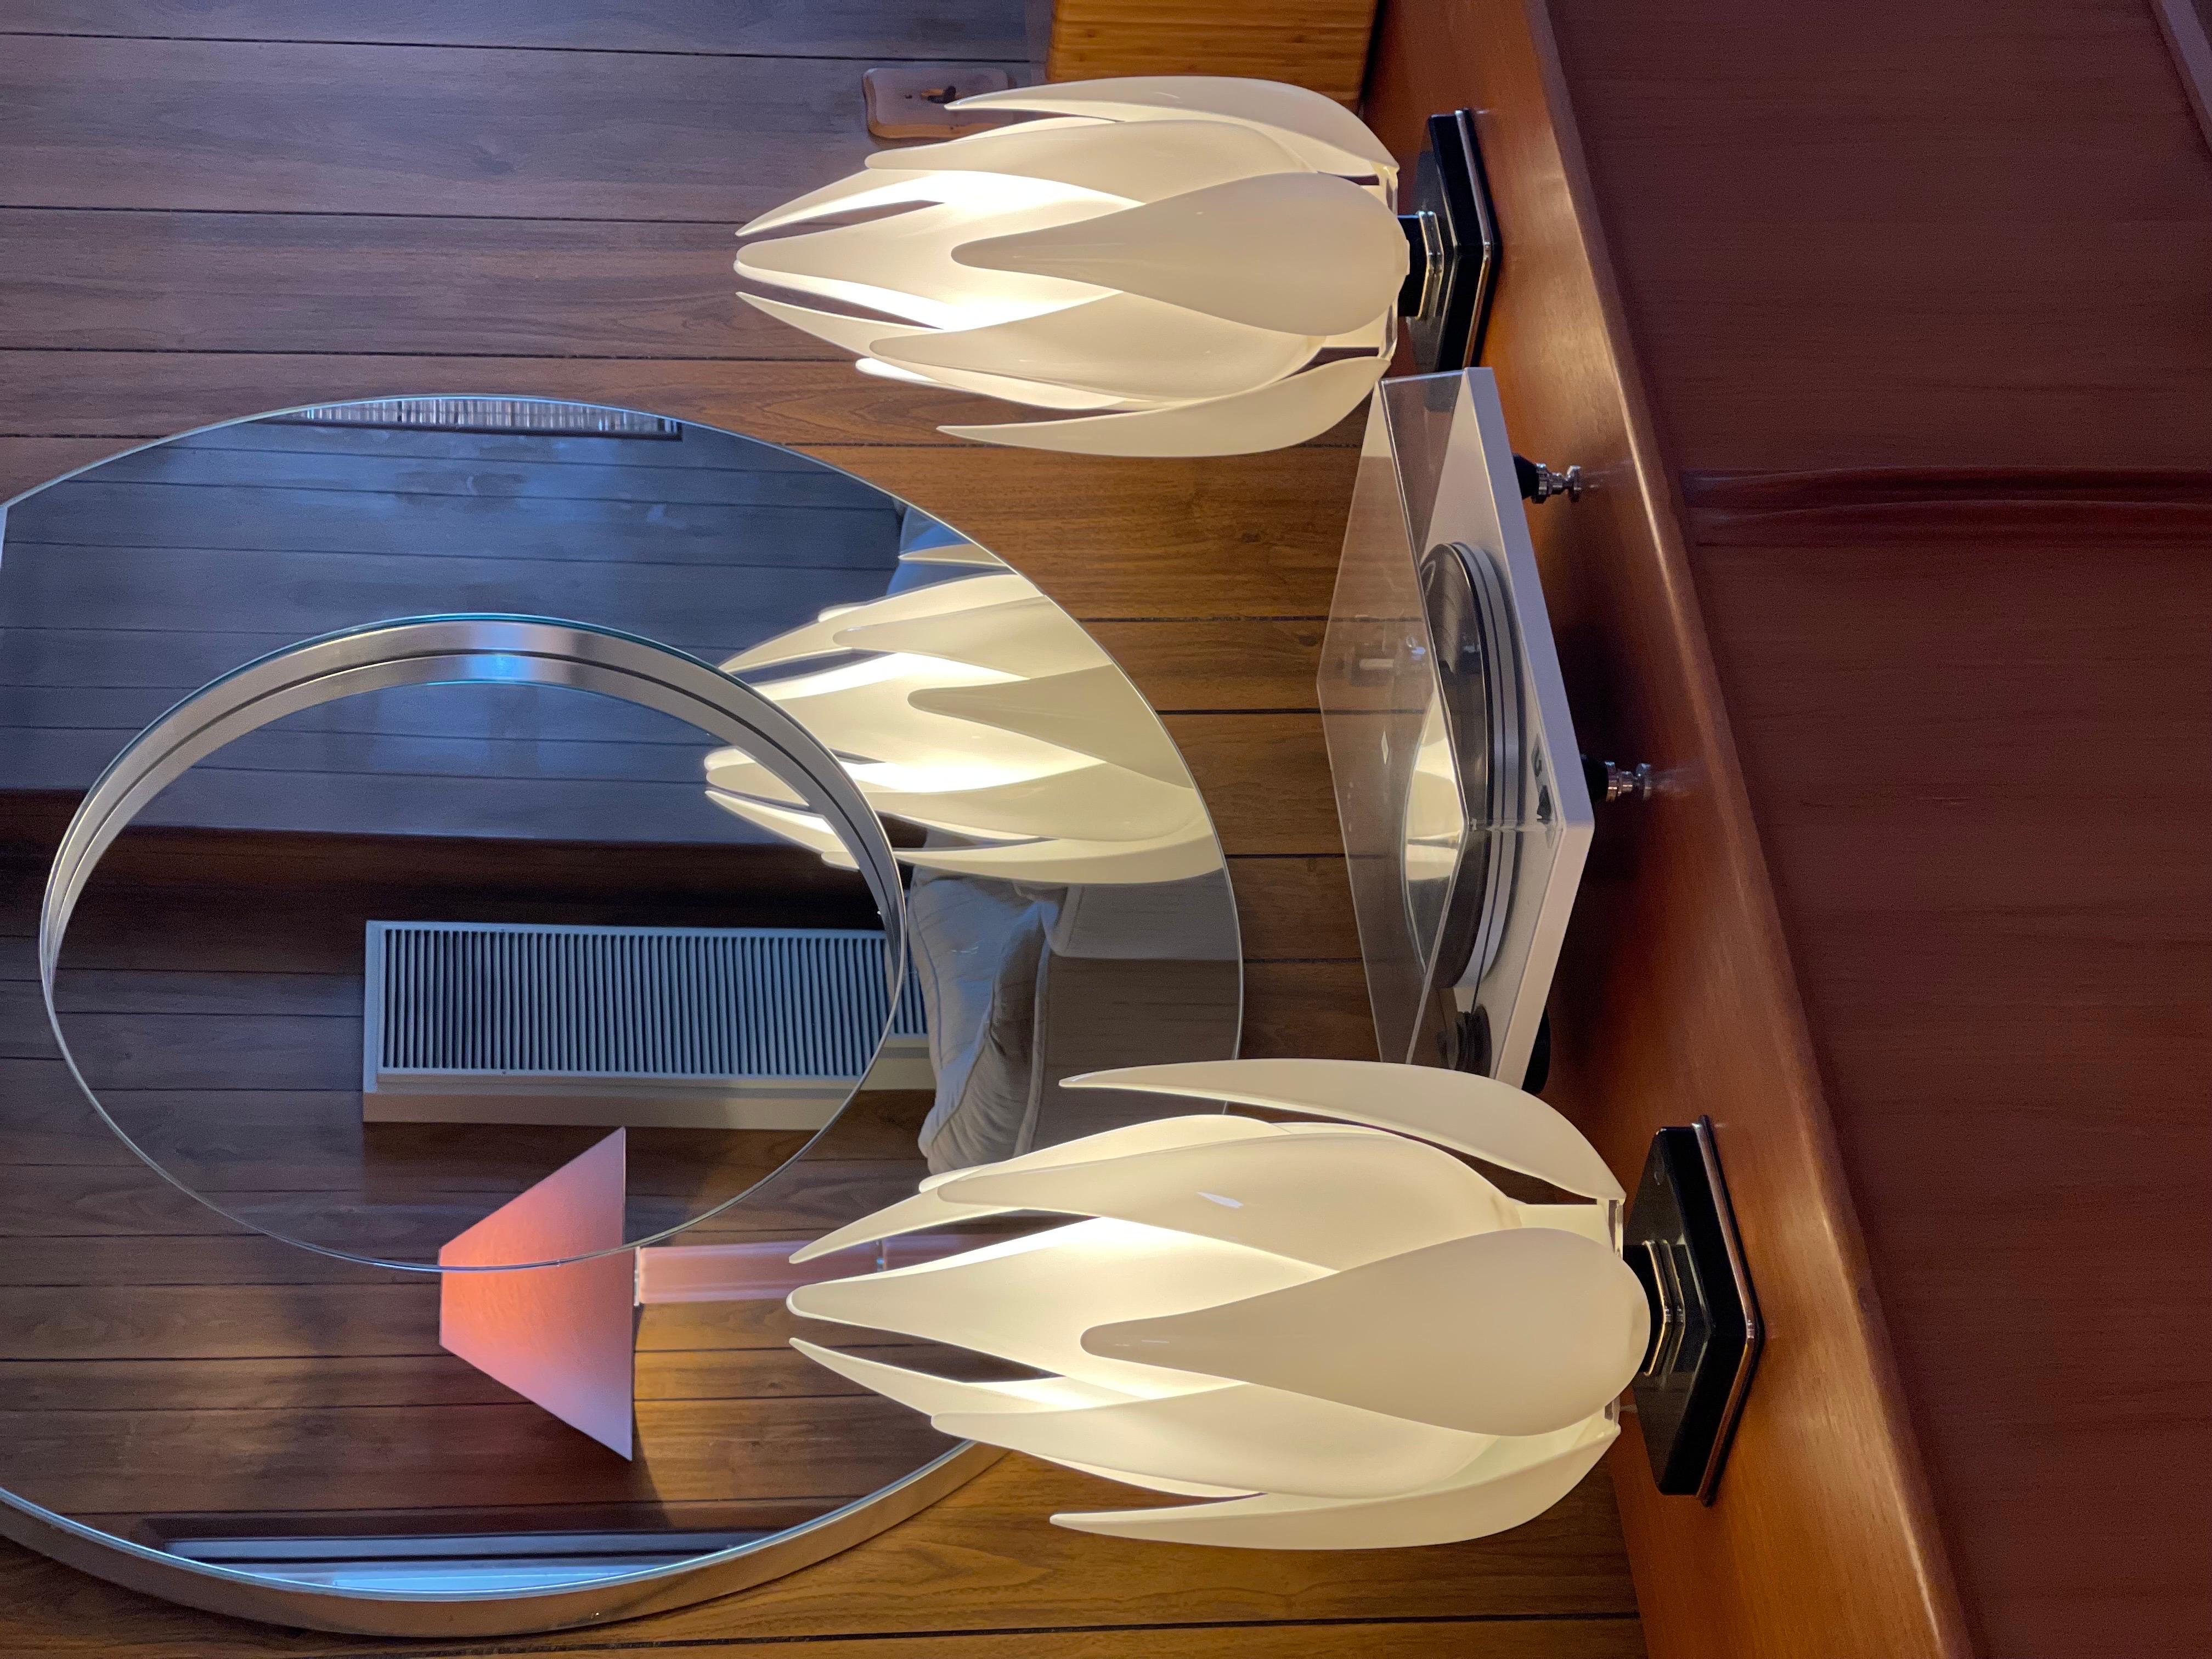 Stunning original 1970s lotus lamps by Rougier. Definitely a talking point and timeless design.